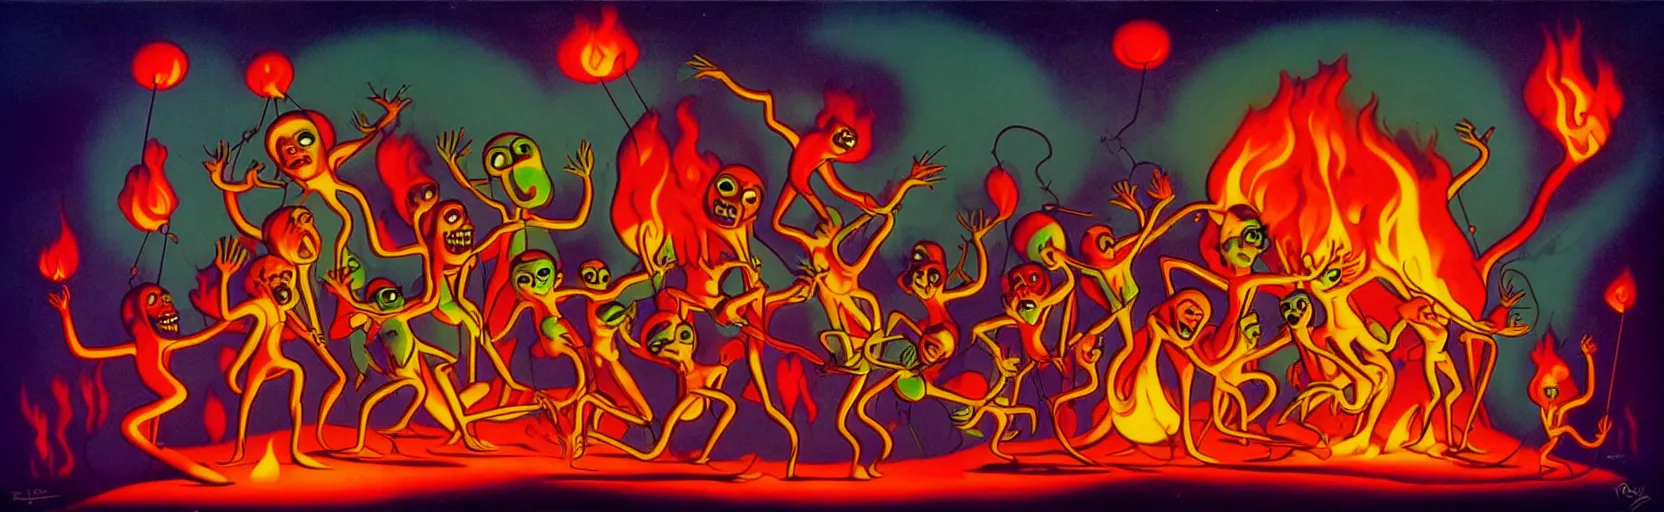 Prompt: uncanny repressed mutants from the depths of a festive imaginal realm in the collective unconscious, dramatic fire glow lighting, surreal dark 1 9 3 0 s fleischer cartoon characters, surreal painting by ronny khalil